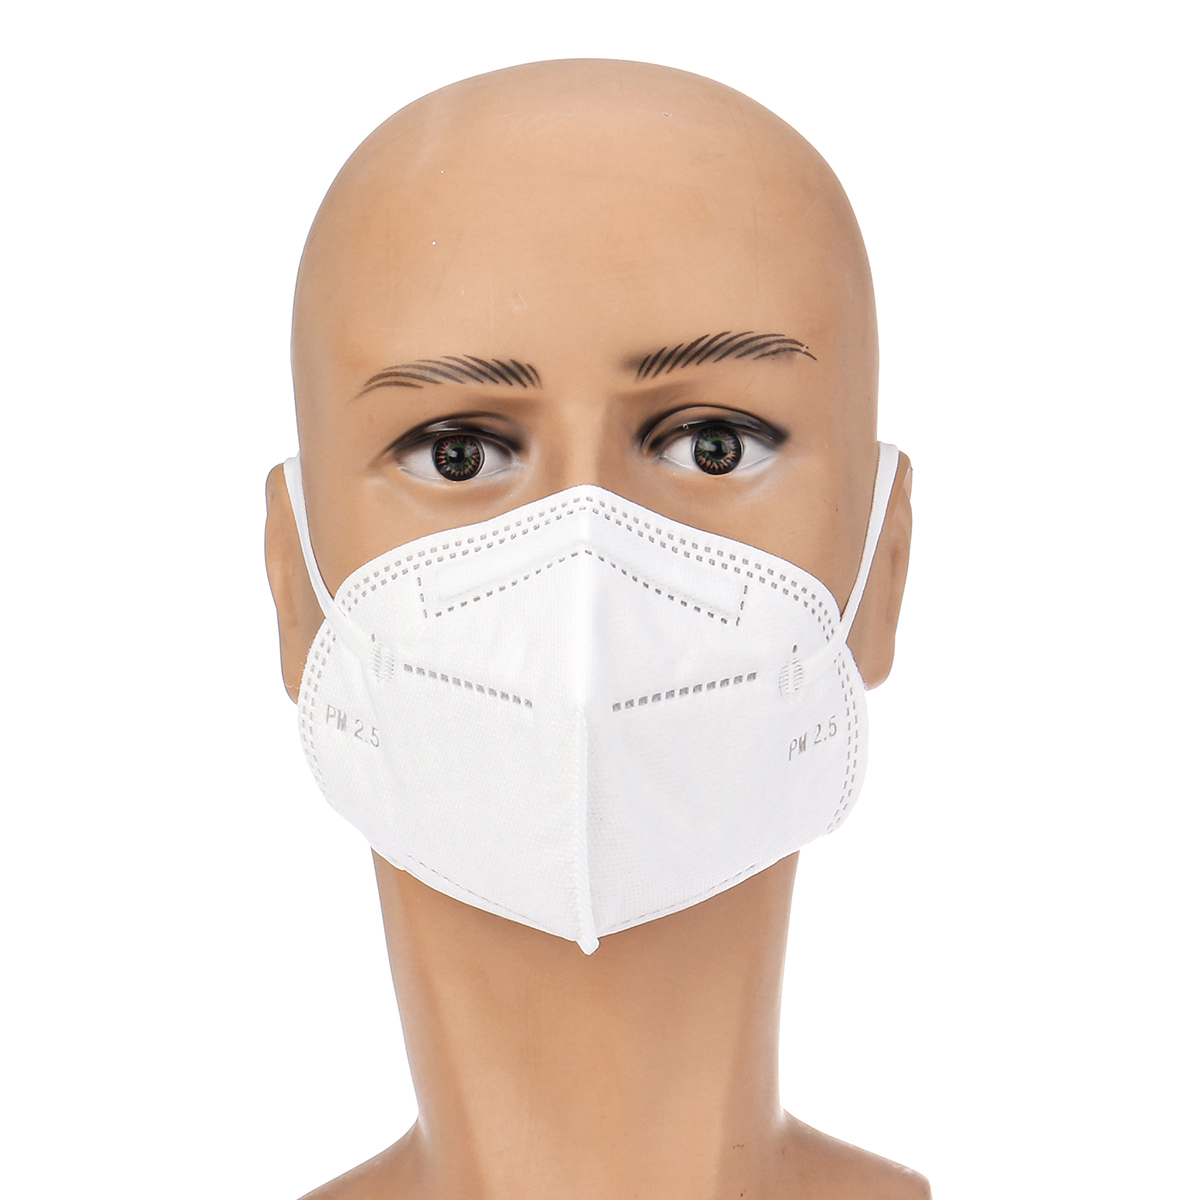 2Pcs-PM25-High-Quality-Mouth-Cover-Filter-Mask-Dustproof-Particulate-Respirator-1643214-1